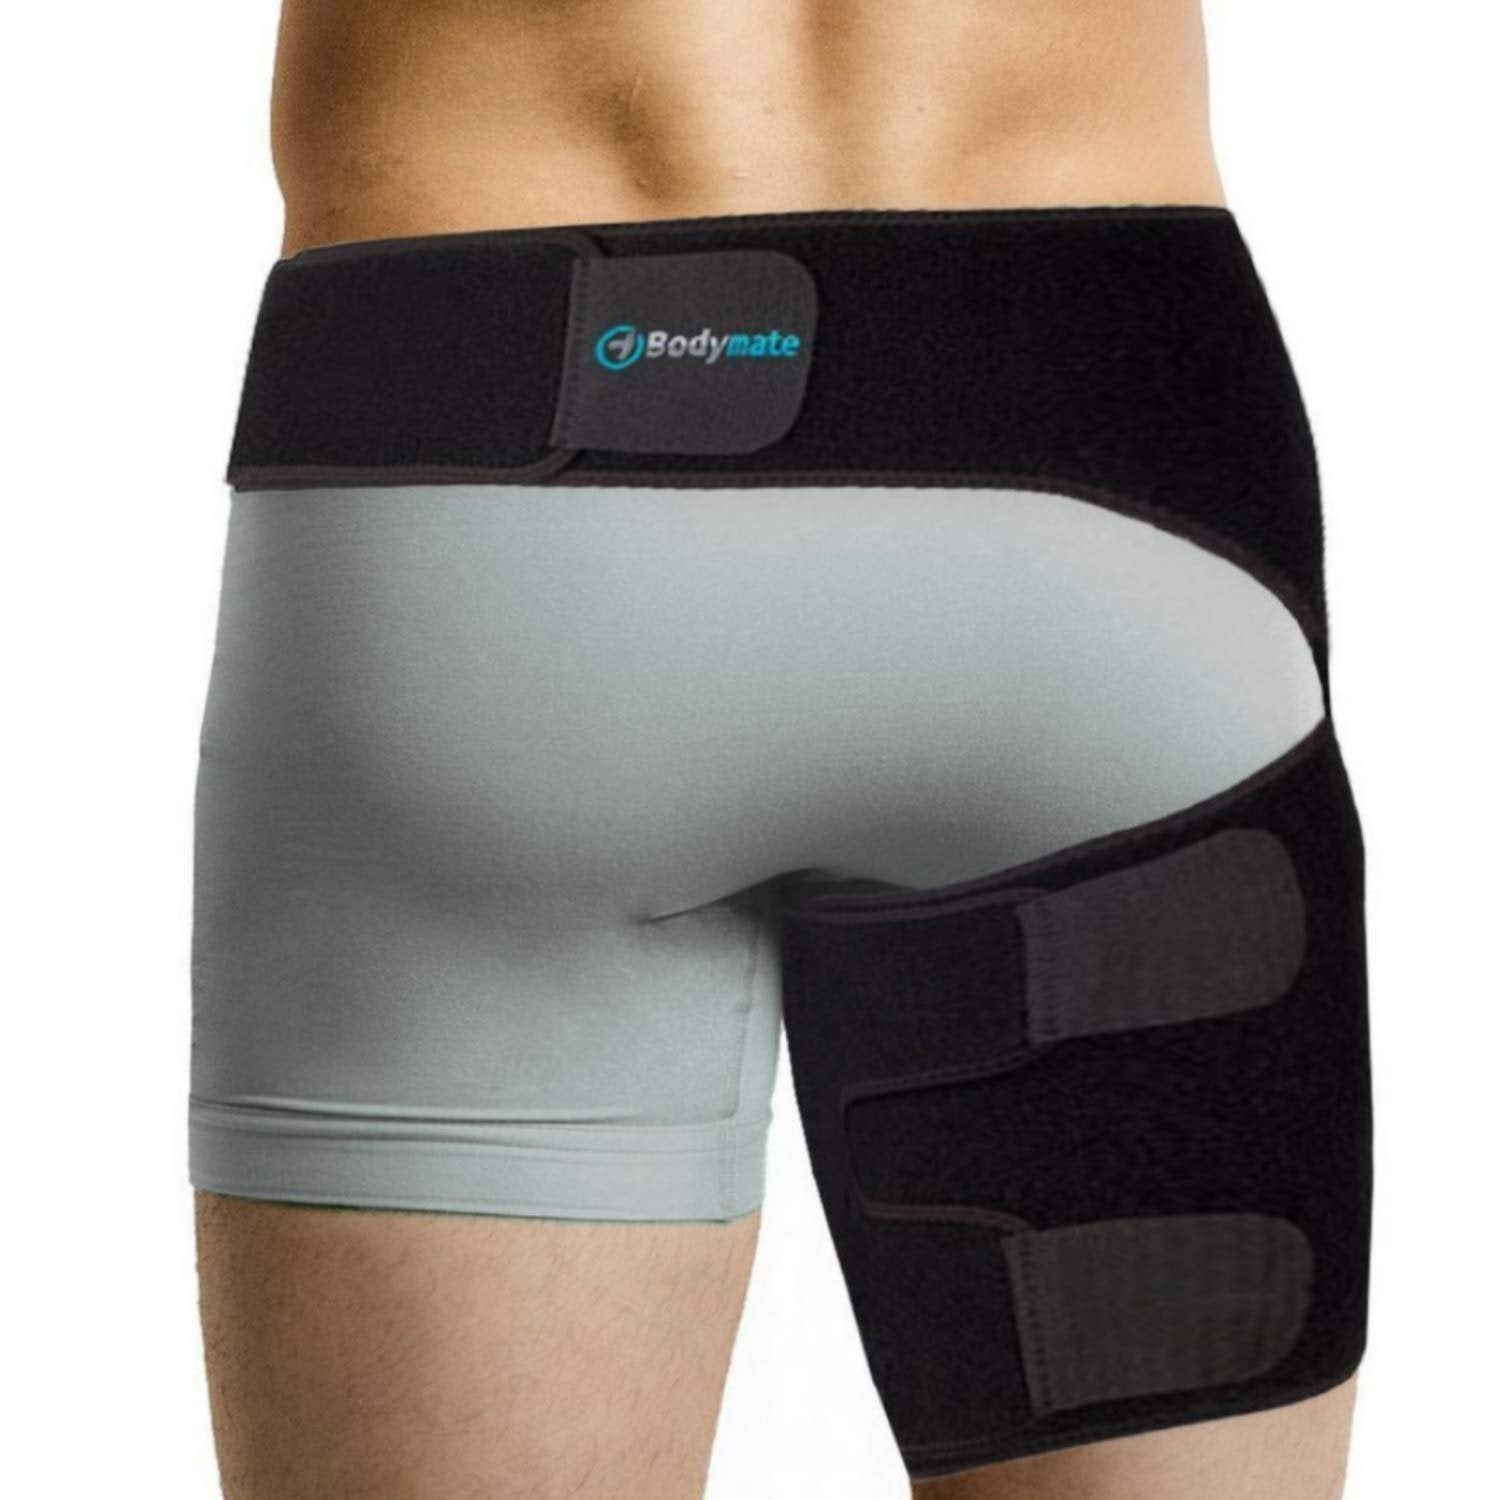 Bodymate® Compression Brace for Hip, Sciatica Nerve Pain Relief Thigh Hamstring, Quadriceps, Joints, Arthritis, Groin Wrap for Pulled Muscles, Hip Strap, Sciatica brace/SI belt for Men, Women